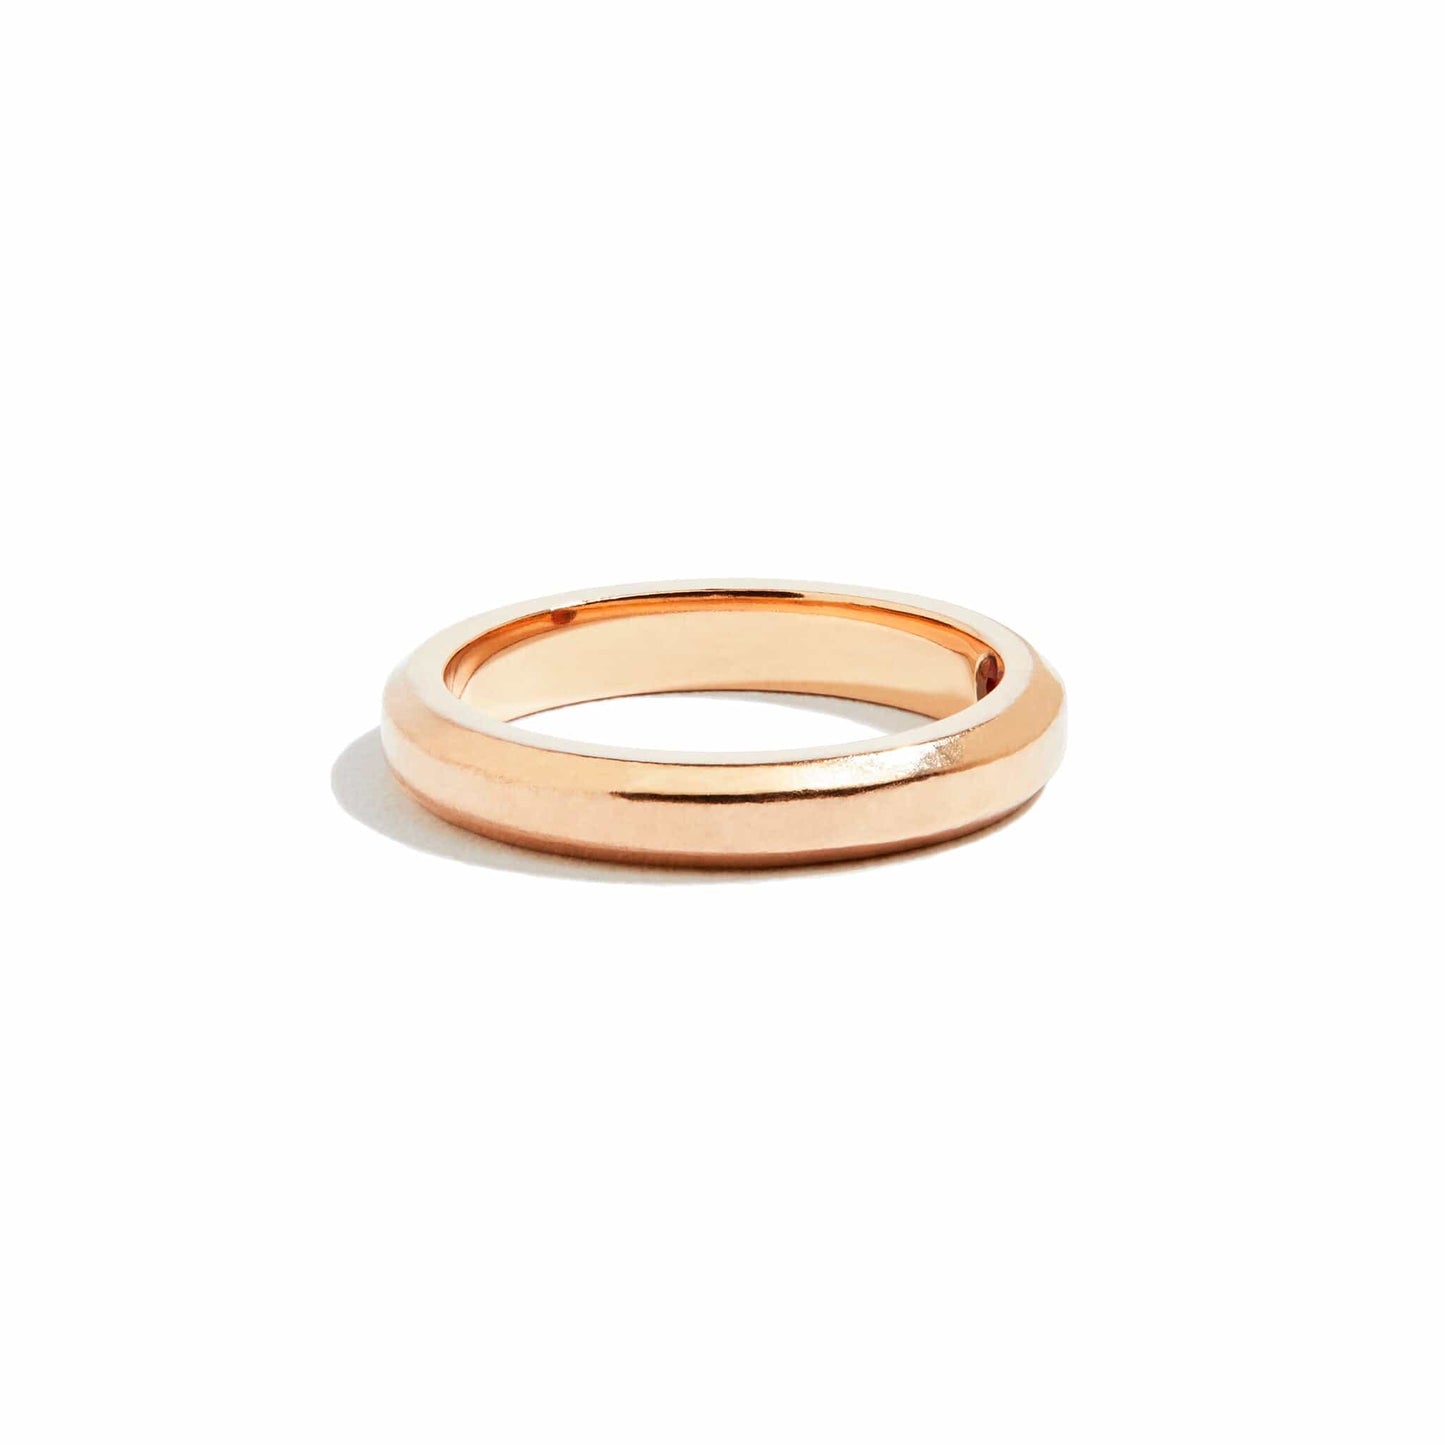 The 'Ira' Solid Gold Beveled Band